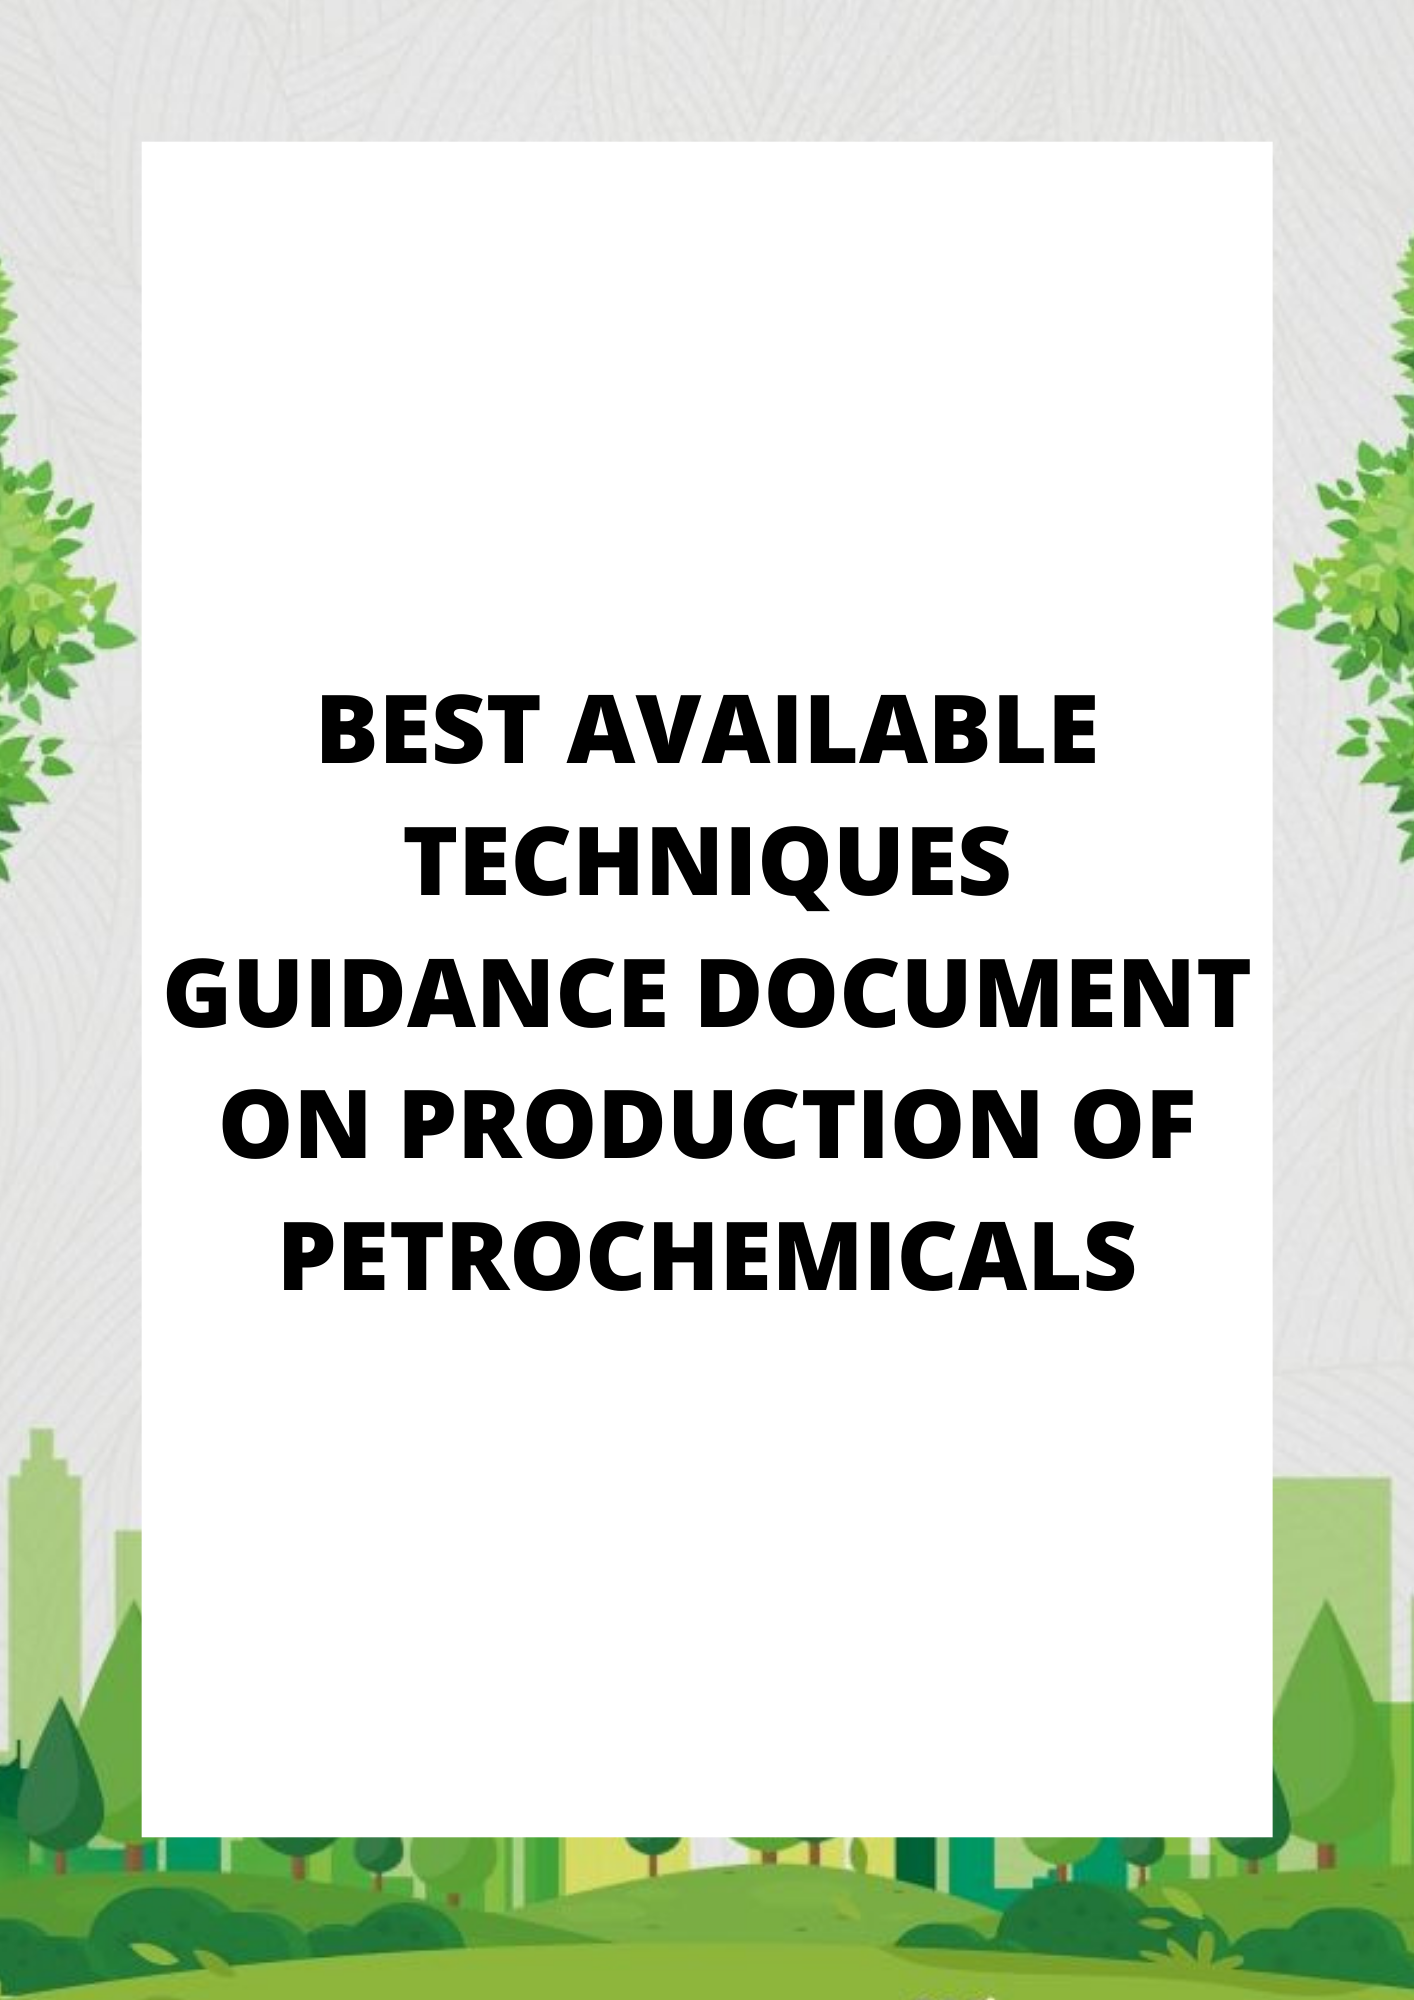 BEST AVAILABLE TECHNIQUES GUIDANCE DOCUMENT ON PRODUCTION OF PETROCHEMICALS